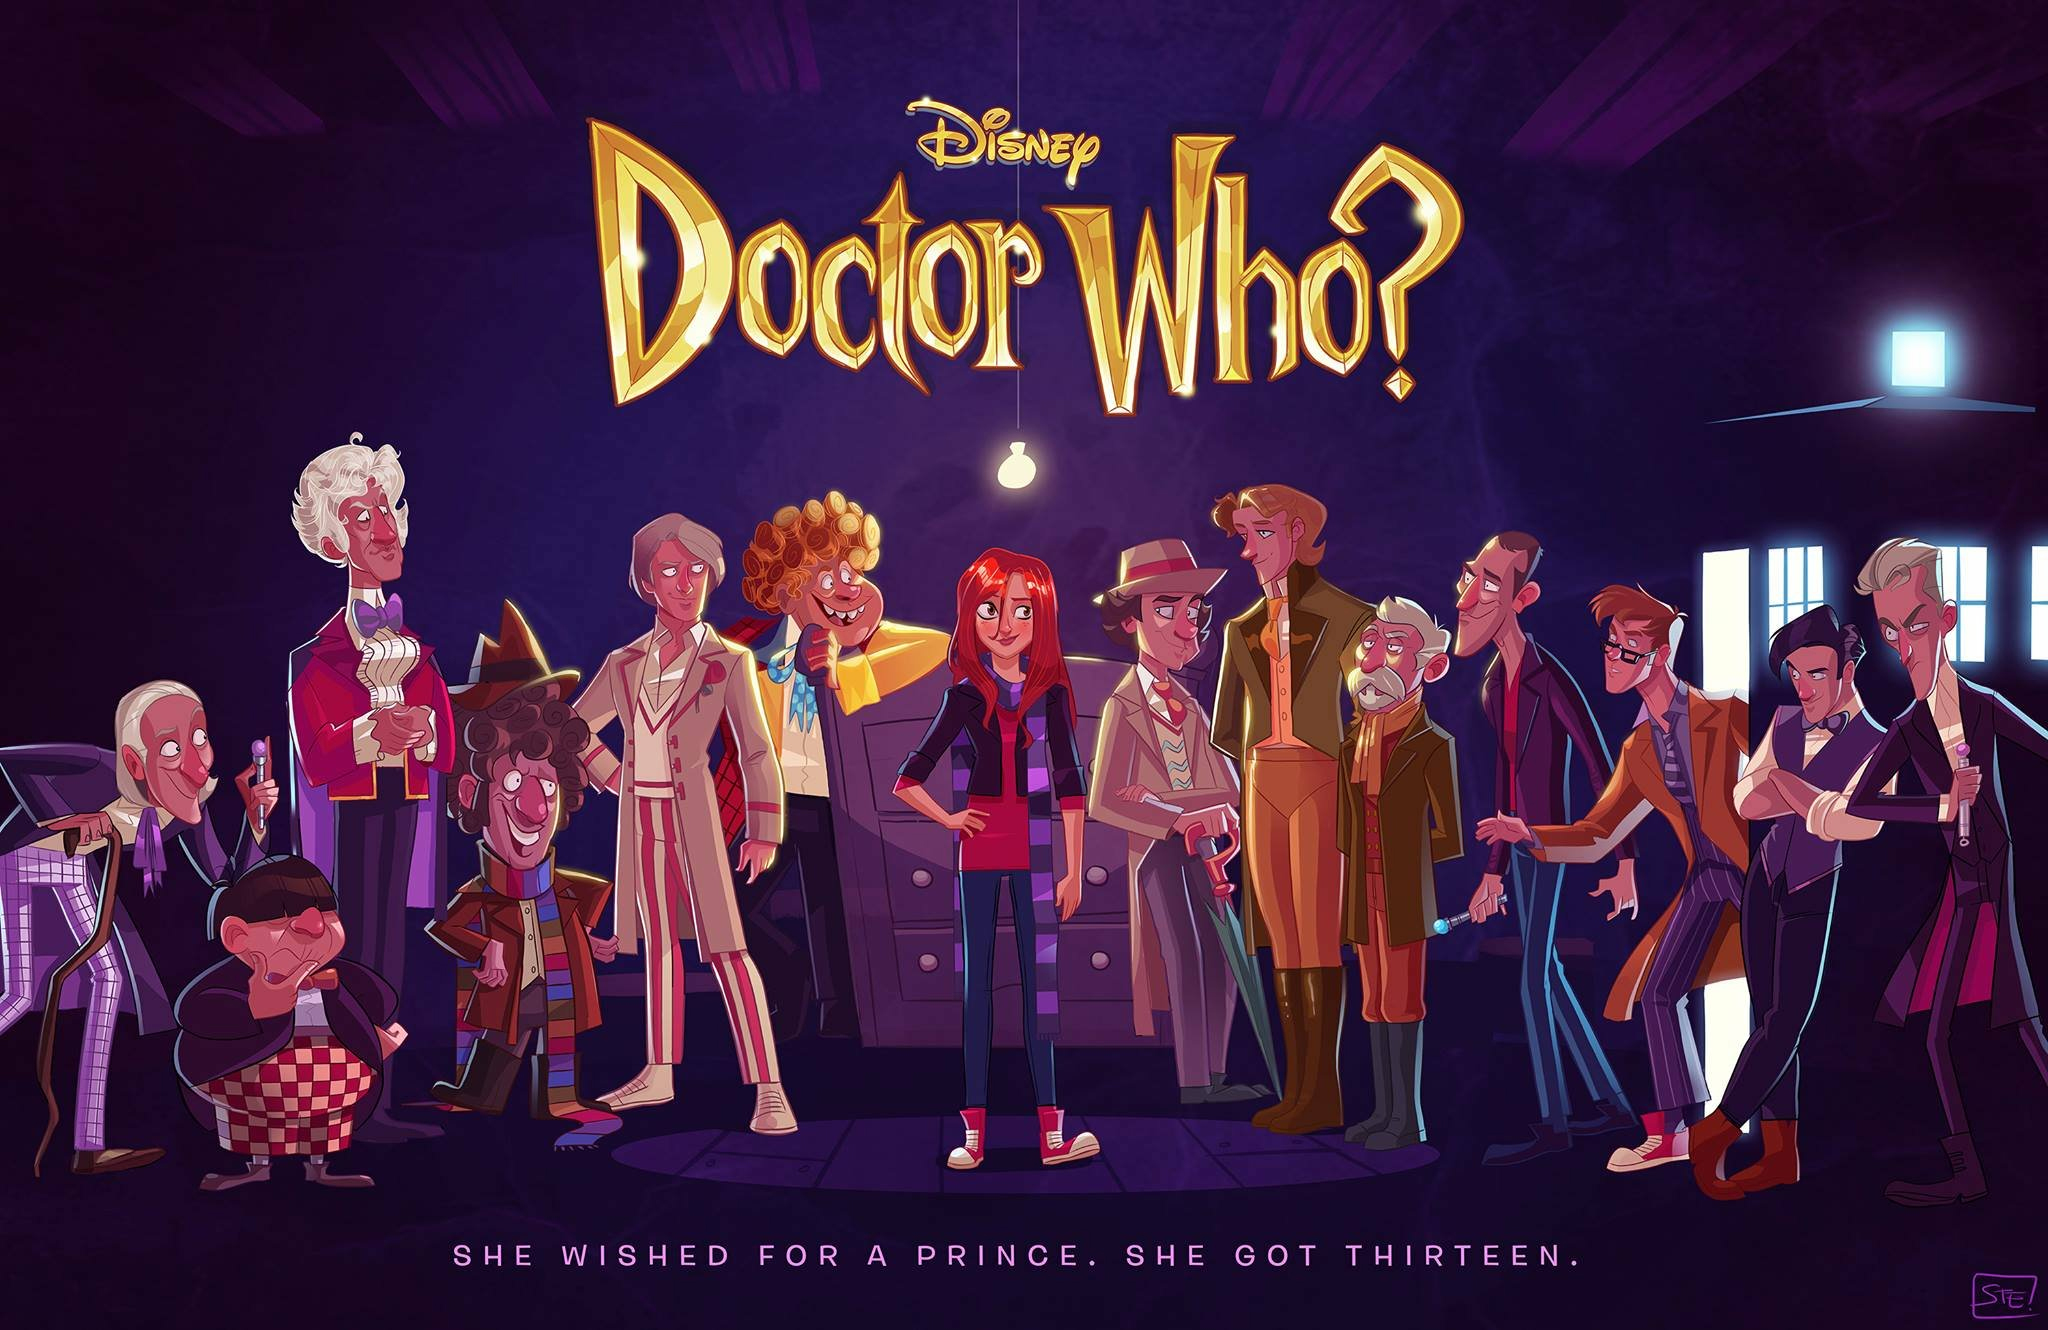 Doctor Who gets a Disney makeover from artist Stephen Byrne 2048x1330